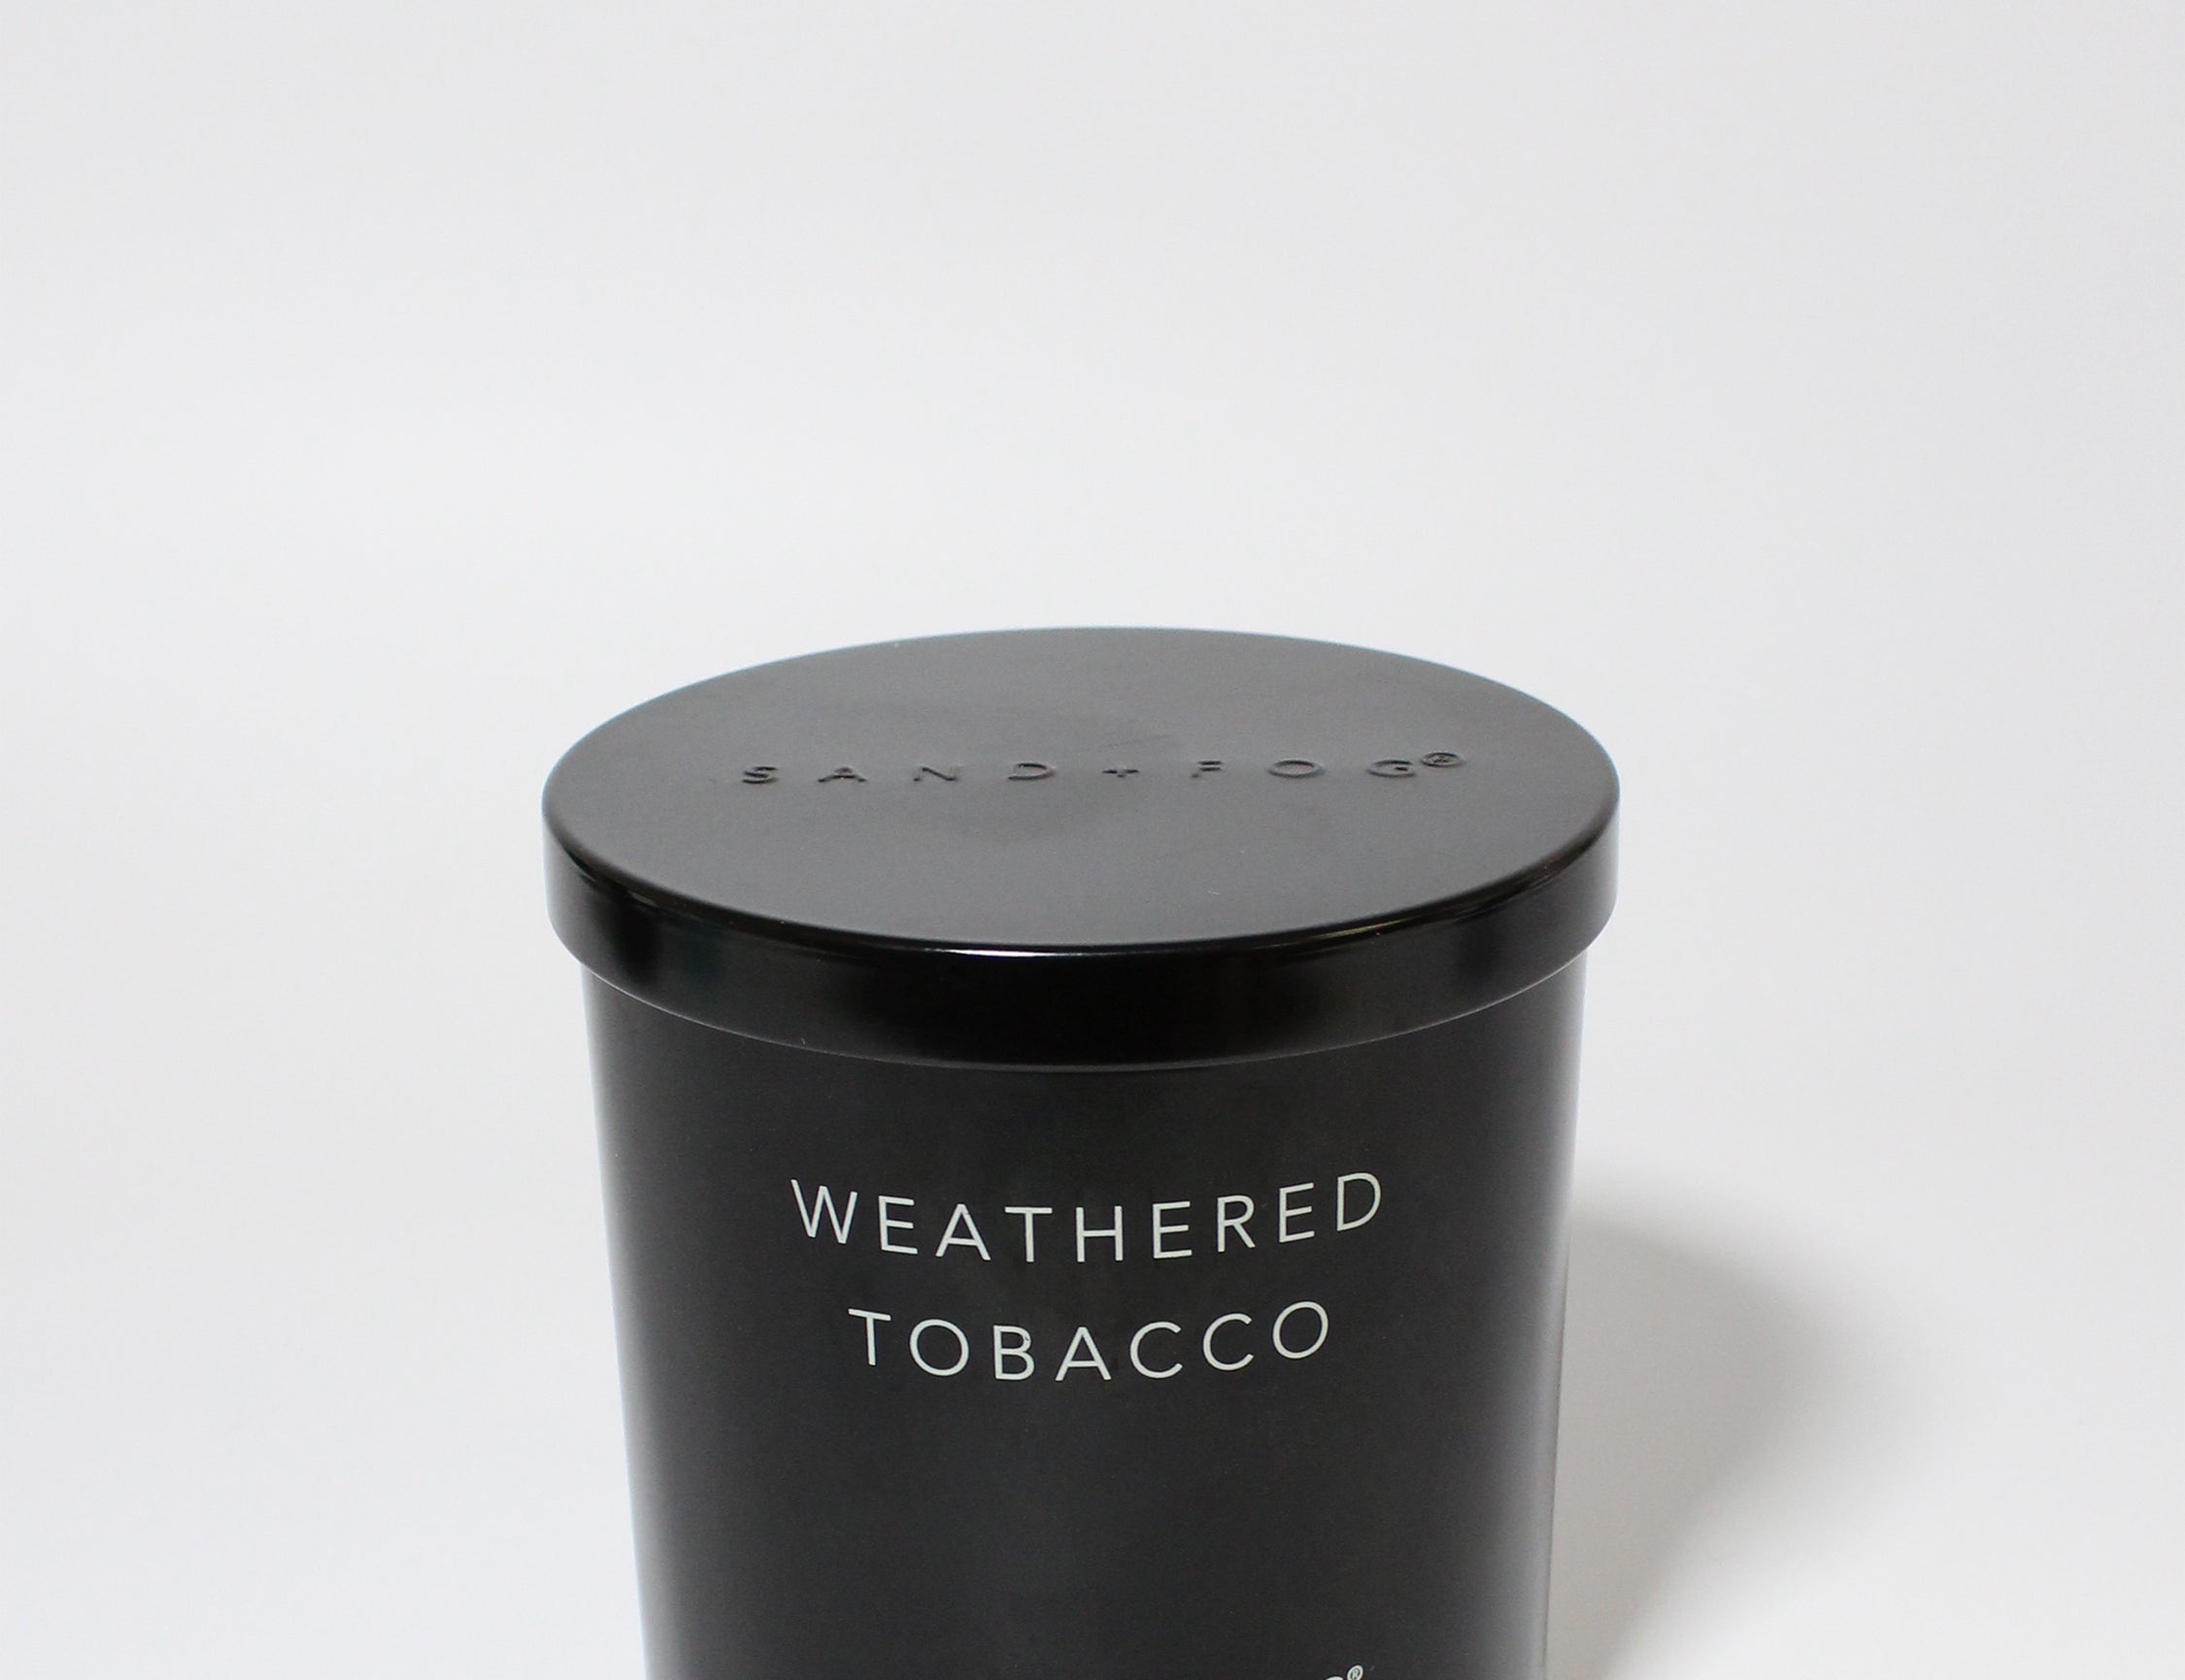 Weathered Tobacco 12 oz scented candle Black vessel with Black lid